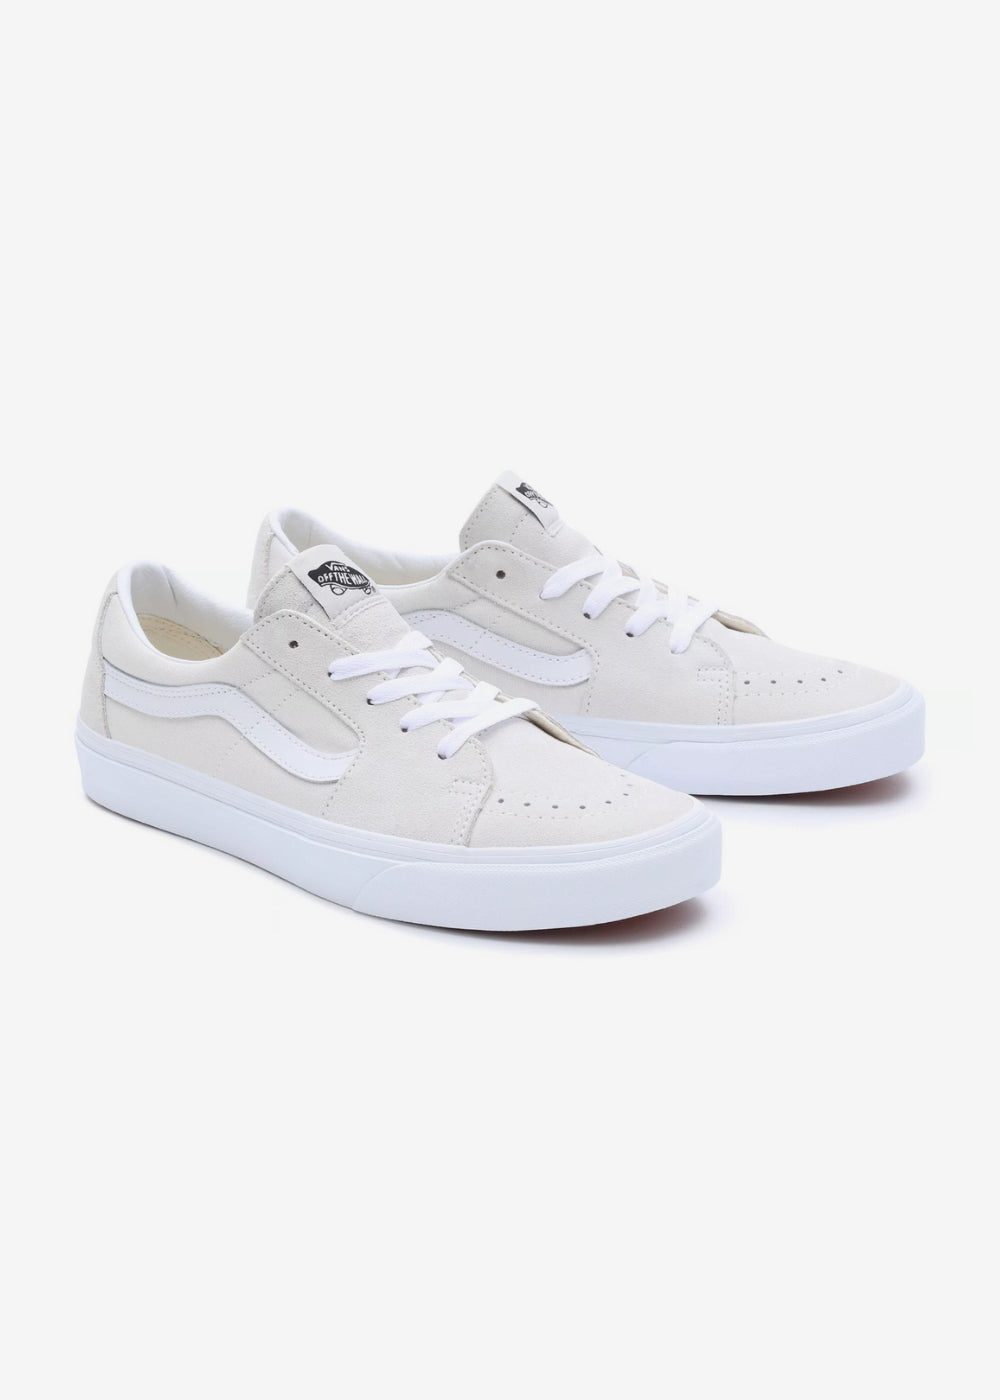 Vans Sk8 Low Shoes in Classic White